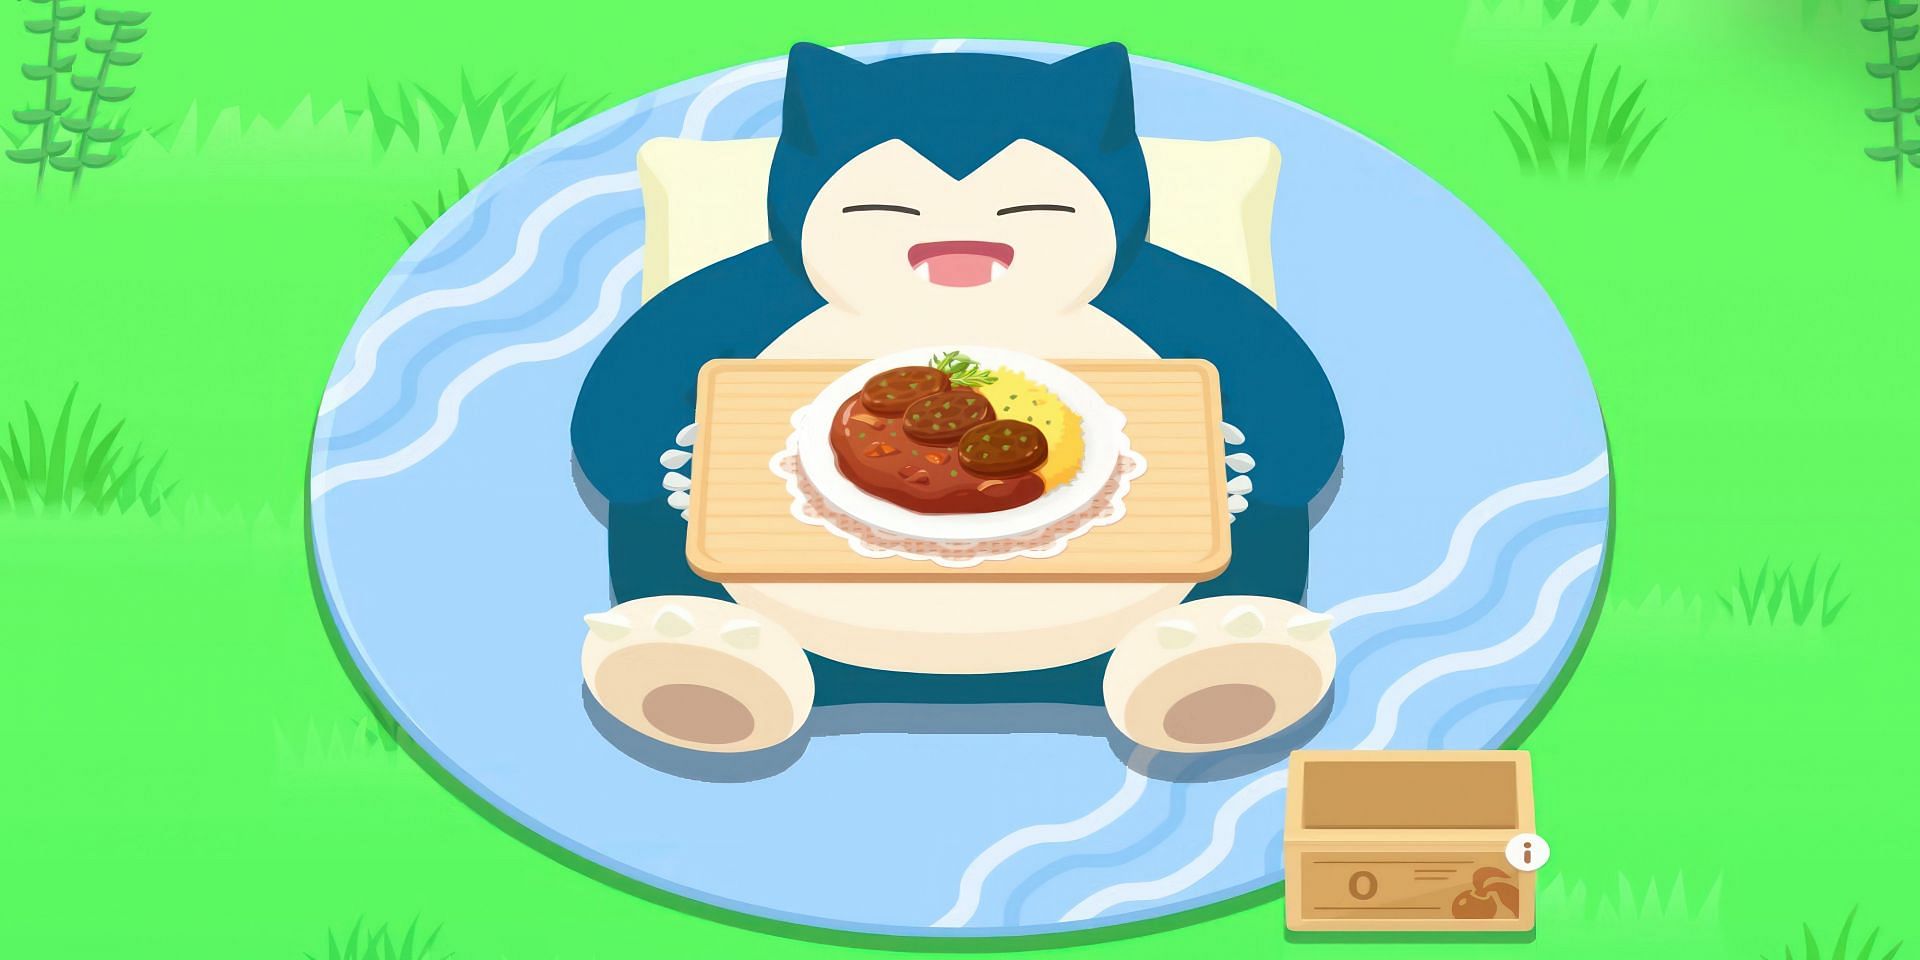 snorlax eating a tasty meal